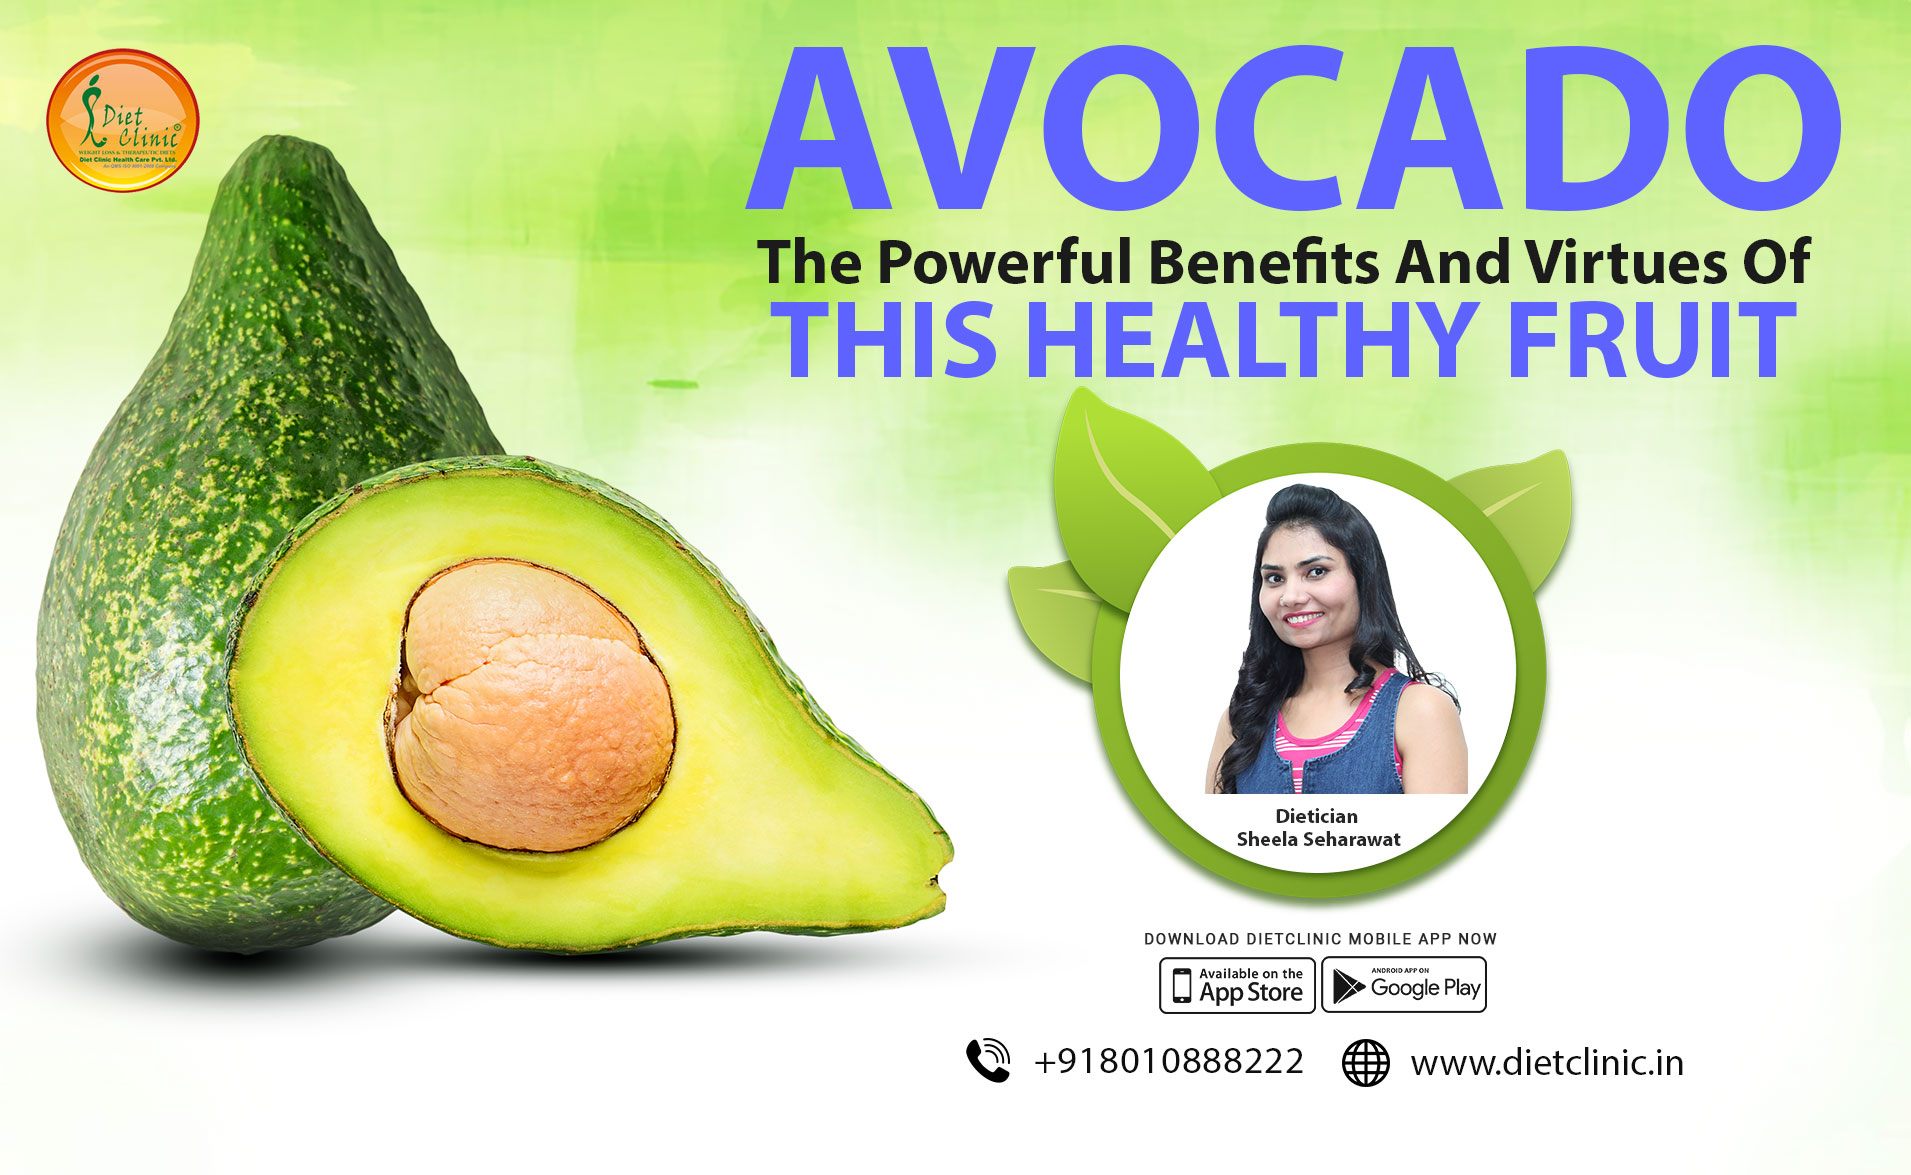 Avocado, the powerful benefits and virtues of this healthy fruit